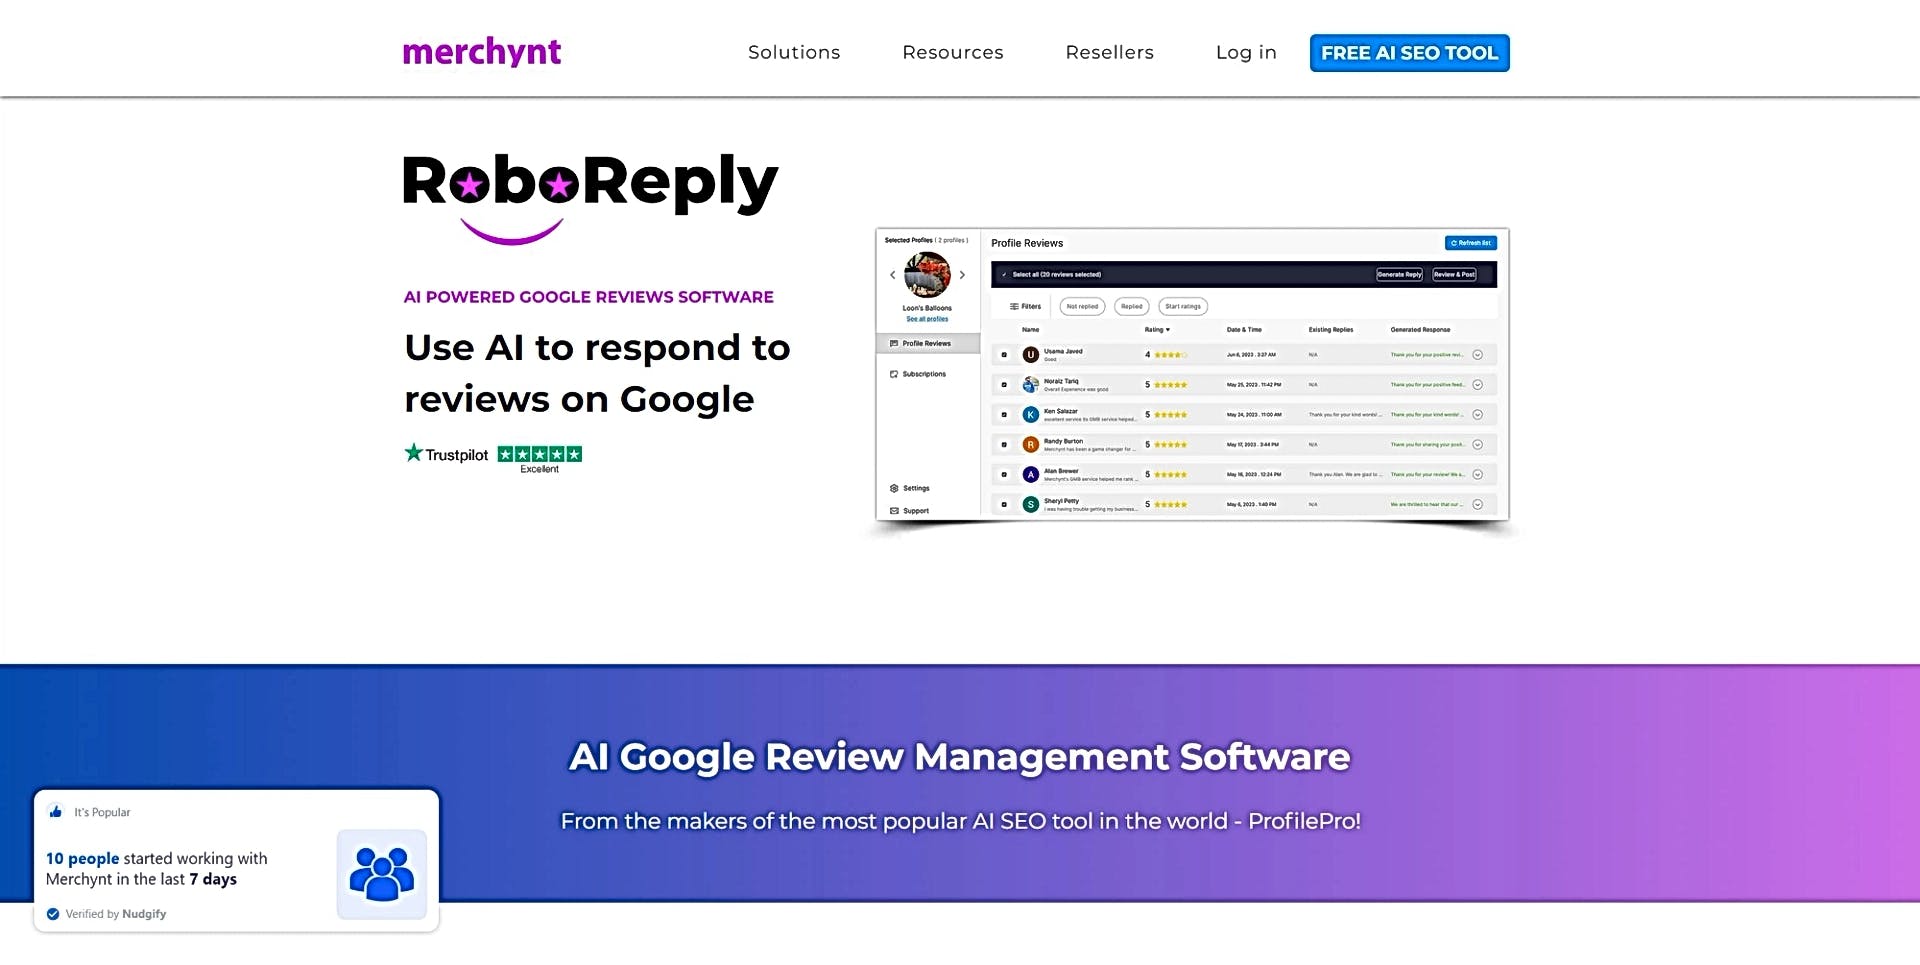 RoboReply featured